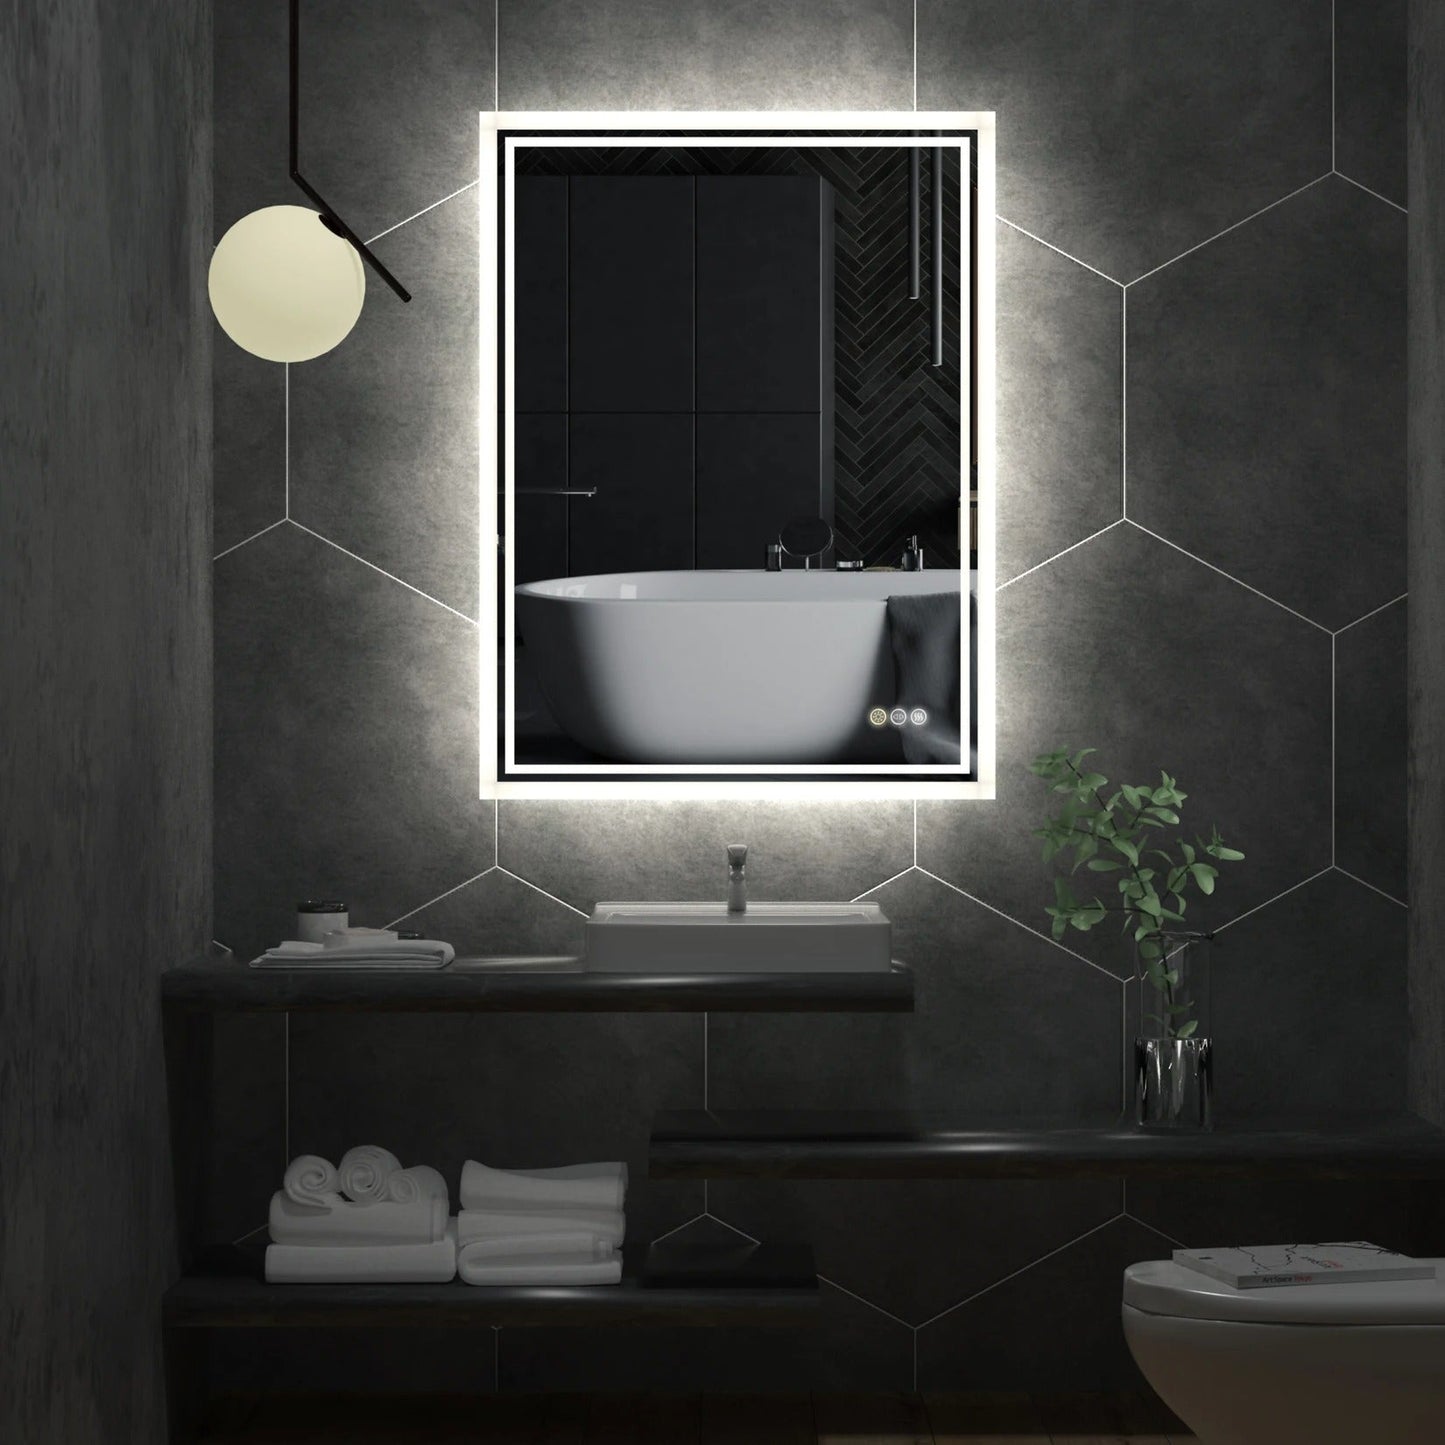 Backlit Rectangle Large LED Bathroom Vanity Mirror, Dimmable, Touch Control, Waterproof